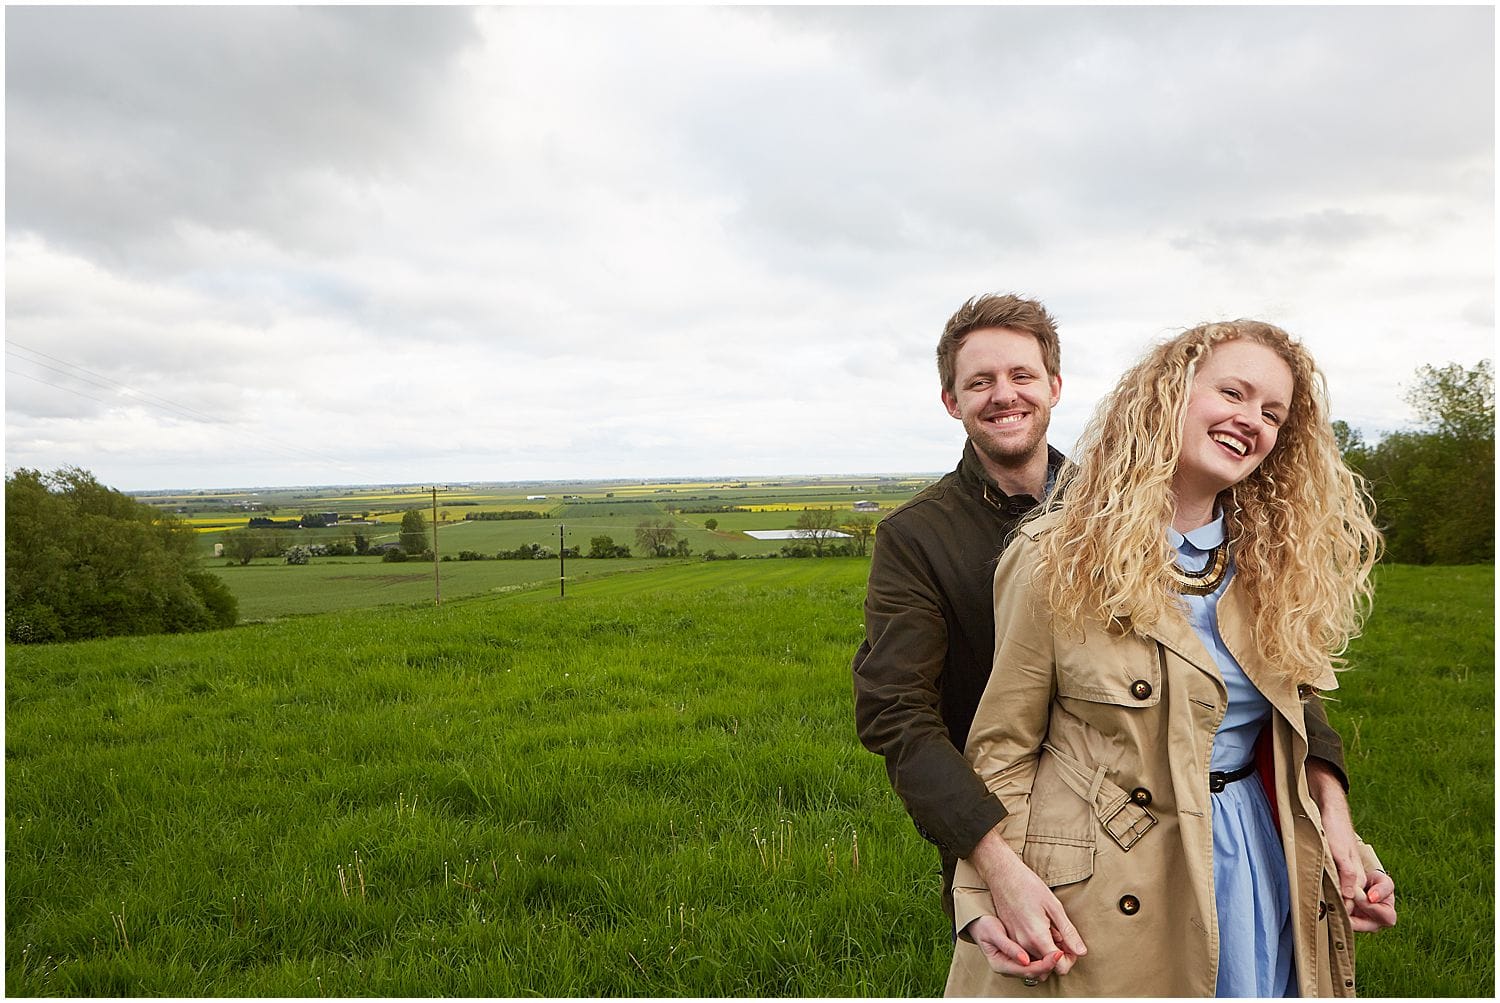 A couple smiling in the countryside during an engagement photoshoot